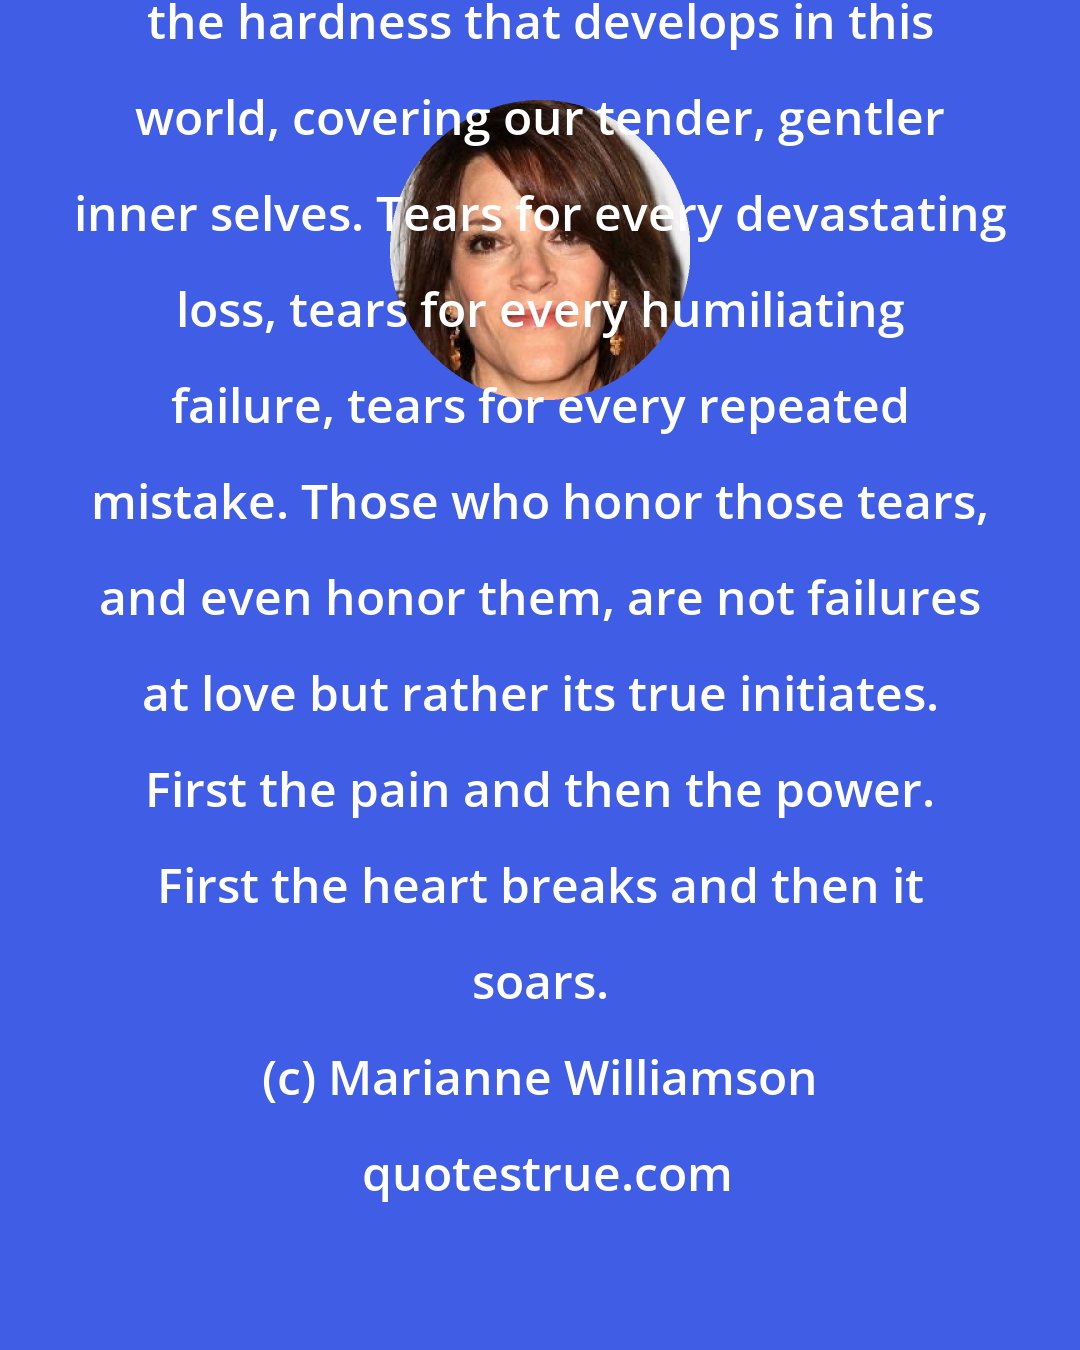 Marianne Williamson: It can take years of tears to melt the hardness that develops in this world, covering our tender, gentler inner selves. Tears for every devastating loss, tears for every humiliating failure, tears for every repeated mistake. Those who honor those tears, and even honor them, are not failures at love but rather its true initiates. First the pain and then the power. First the heart breaks and then it soars.